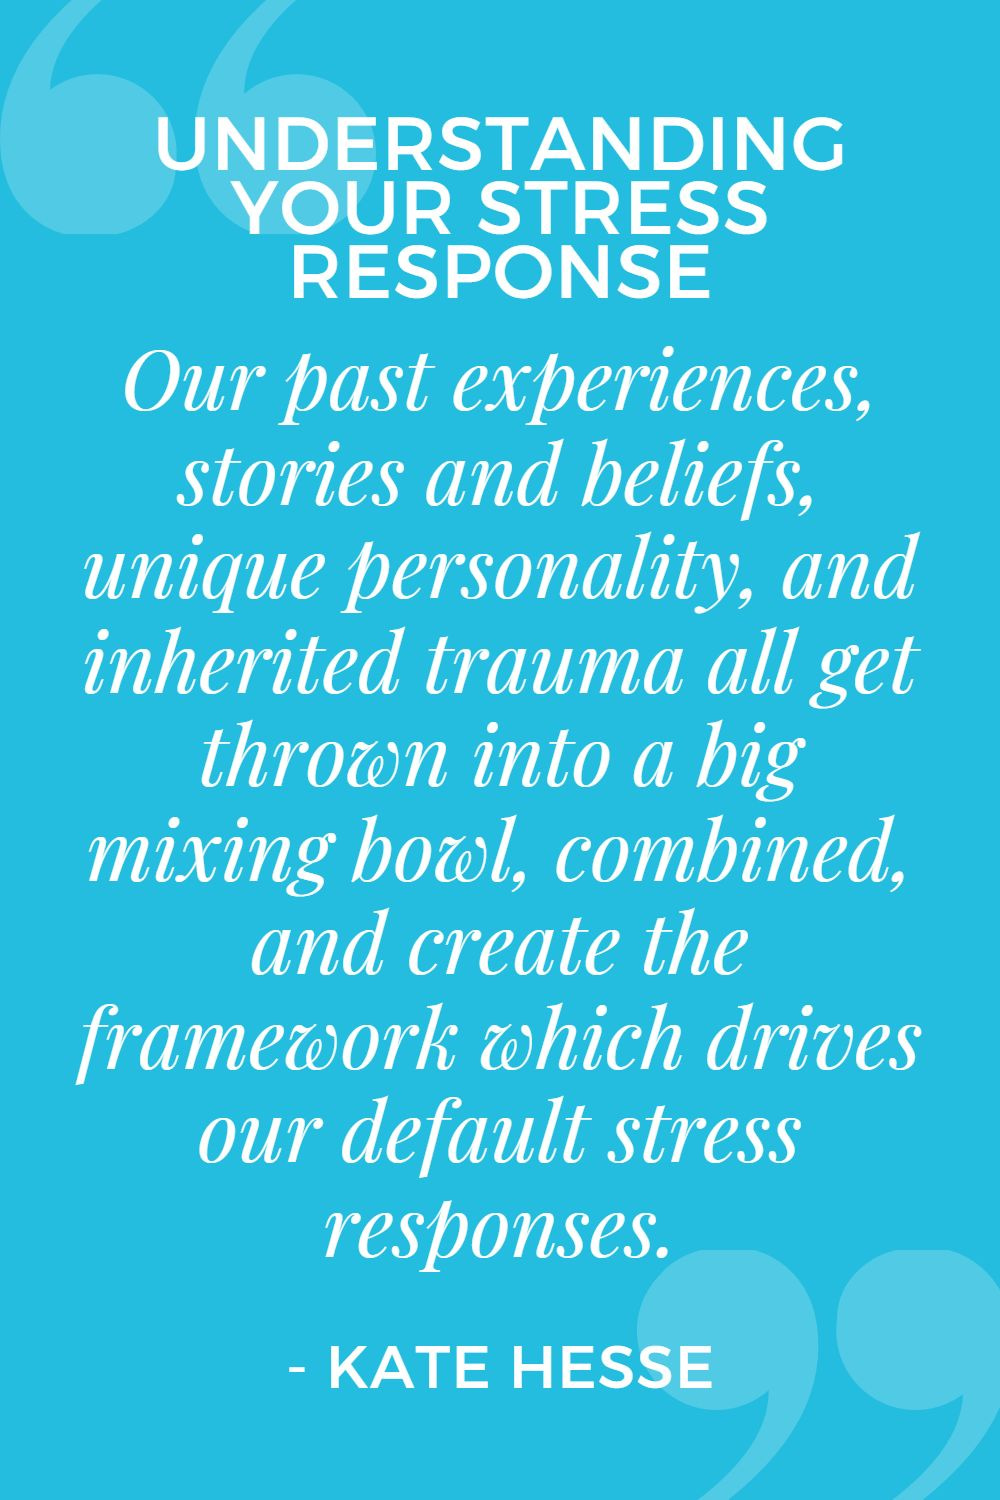 Our past experiences, stories and beliefs, unique personality, and inherited trauma all get thrown into a big mixing bowl, combined, and create the framework which drives our default stress responses.